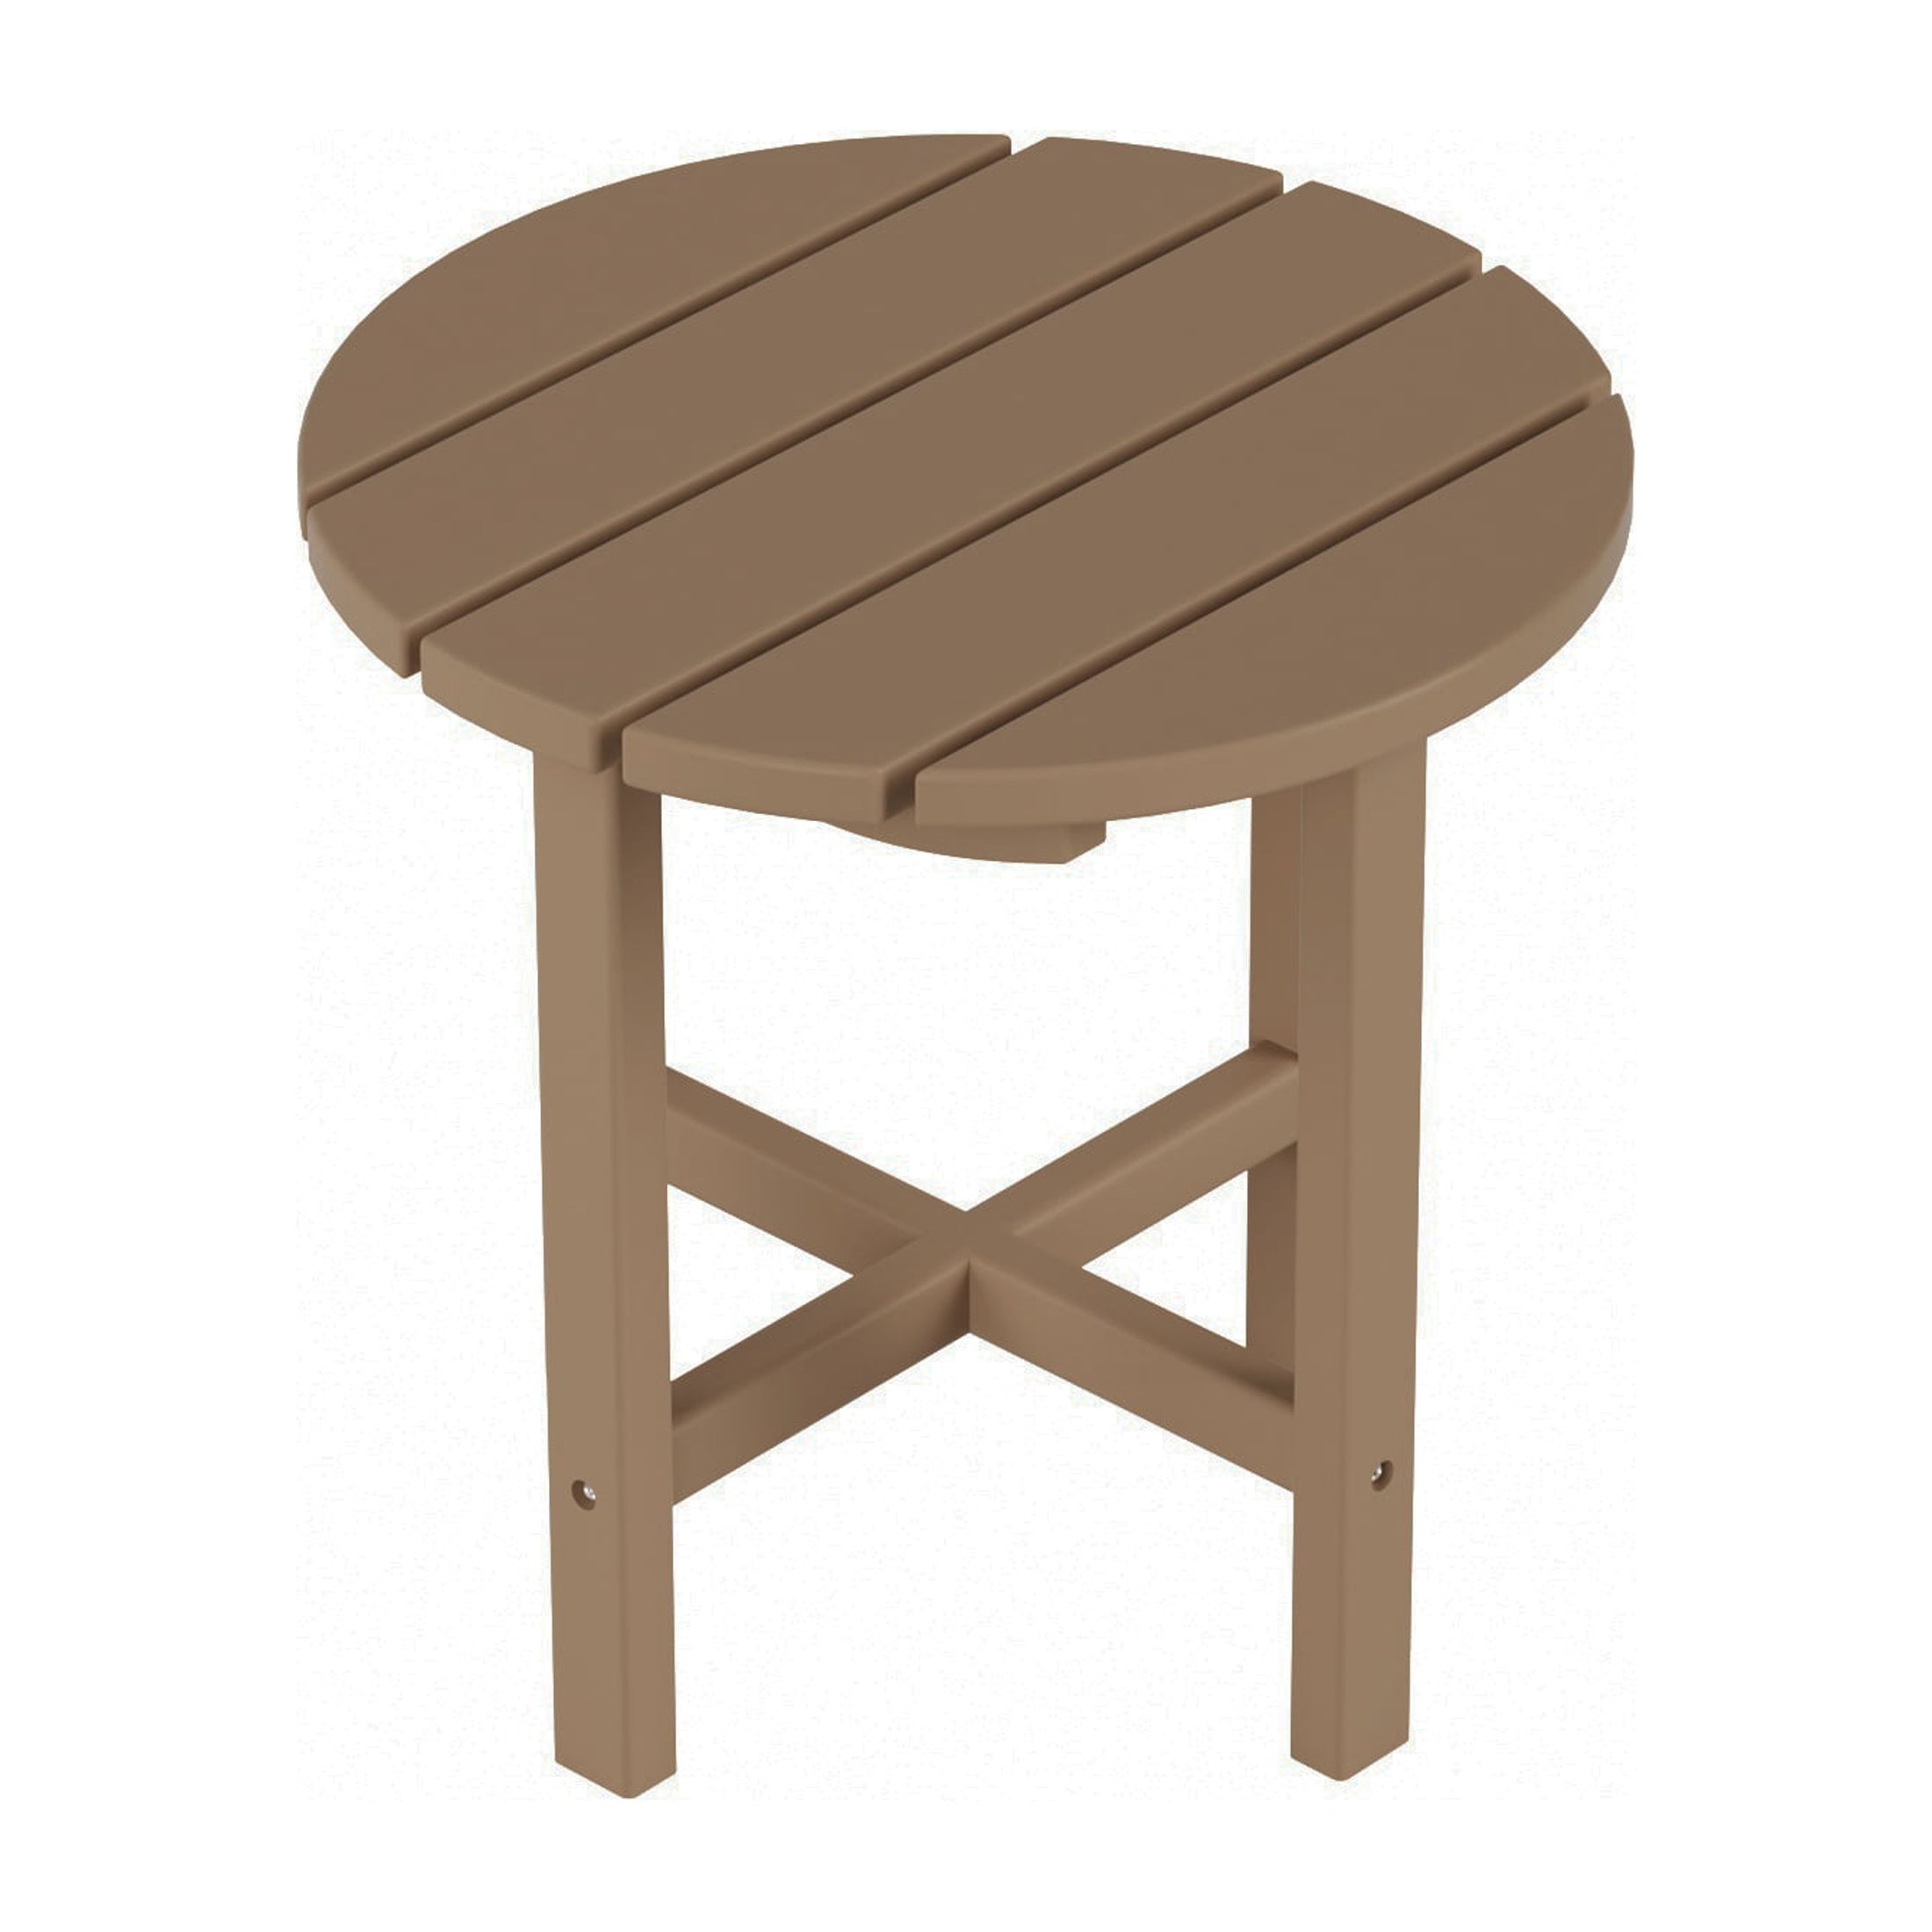 WestinTrends Outdoor Side Table, All Weather Poly Lumber Adirondack Small Patio Table Round End Table for Pool Balcony Deck Porch Lawn Backyard, Weathered Wood - image 5 of 7